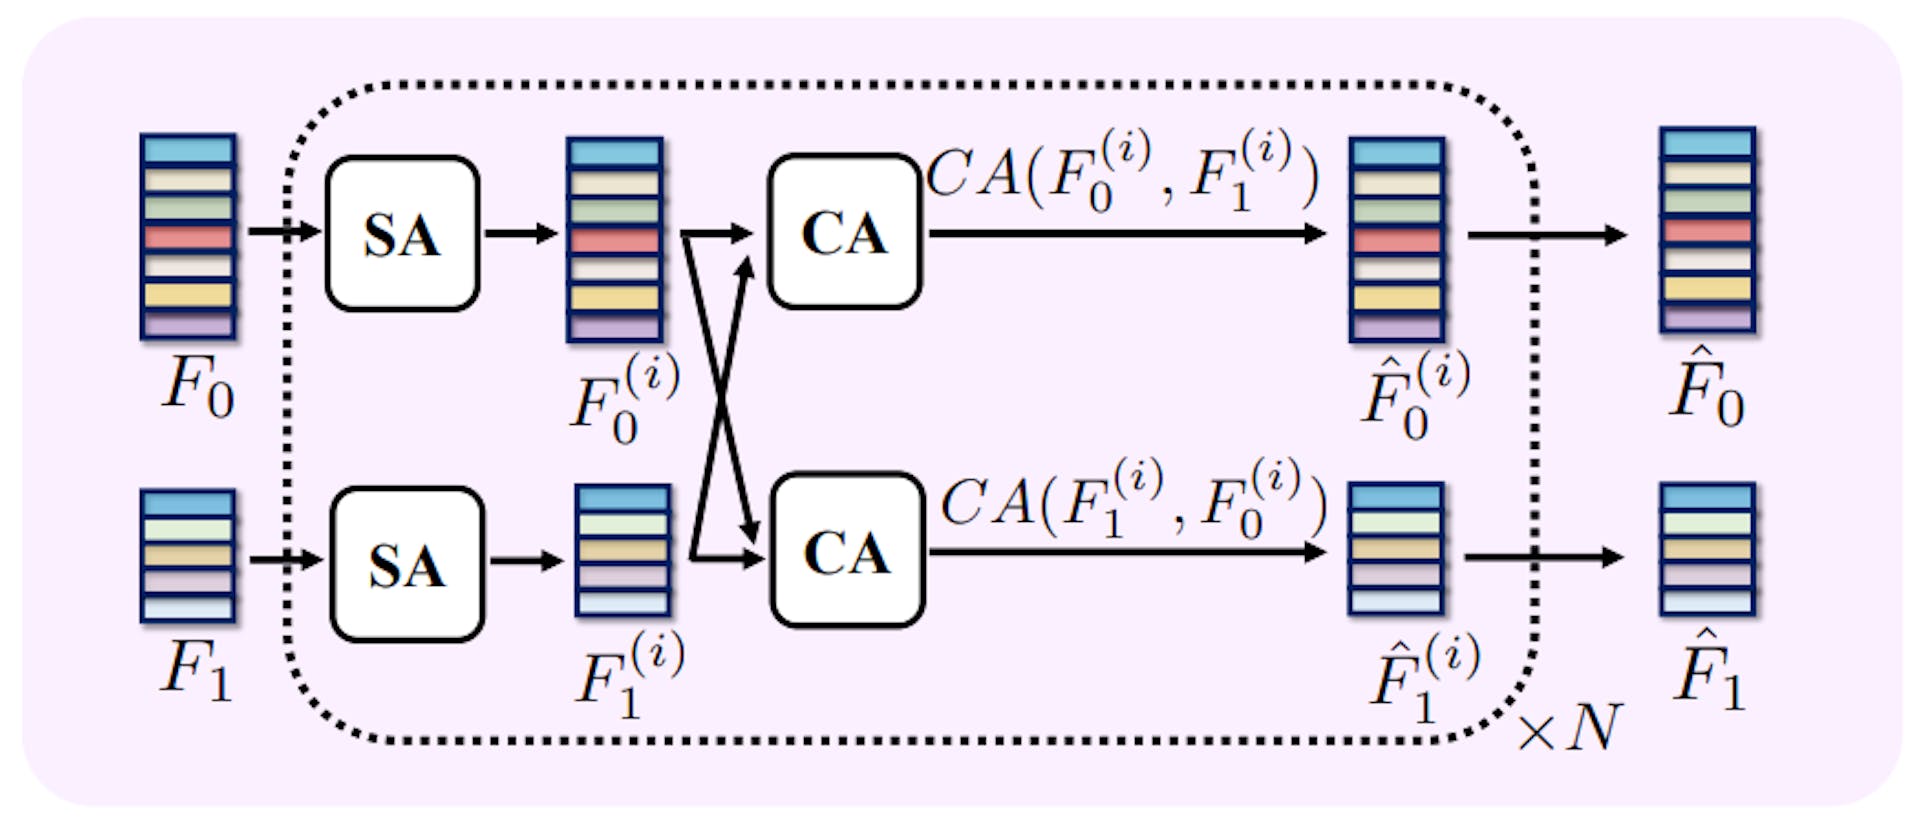 Figure 7: Vertex Correspondence Transformer. SA and CA represent self-attention and cross-attention, respectively.